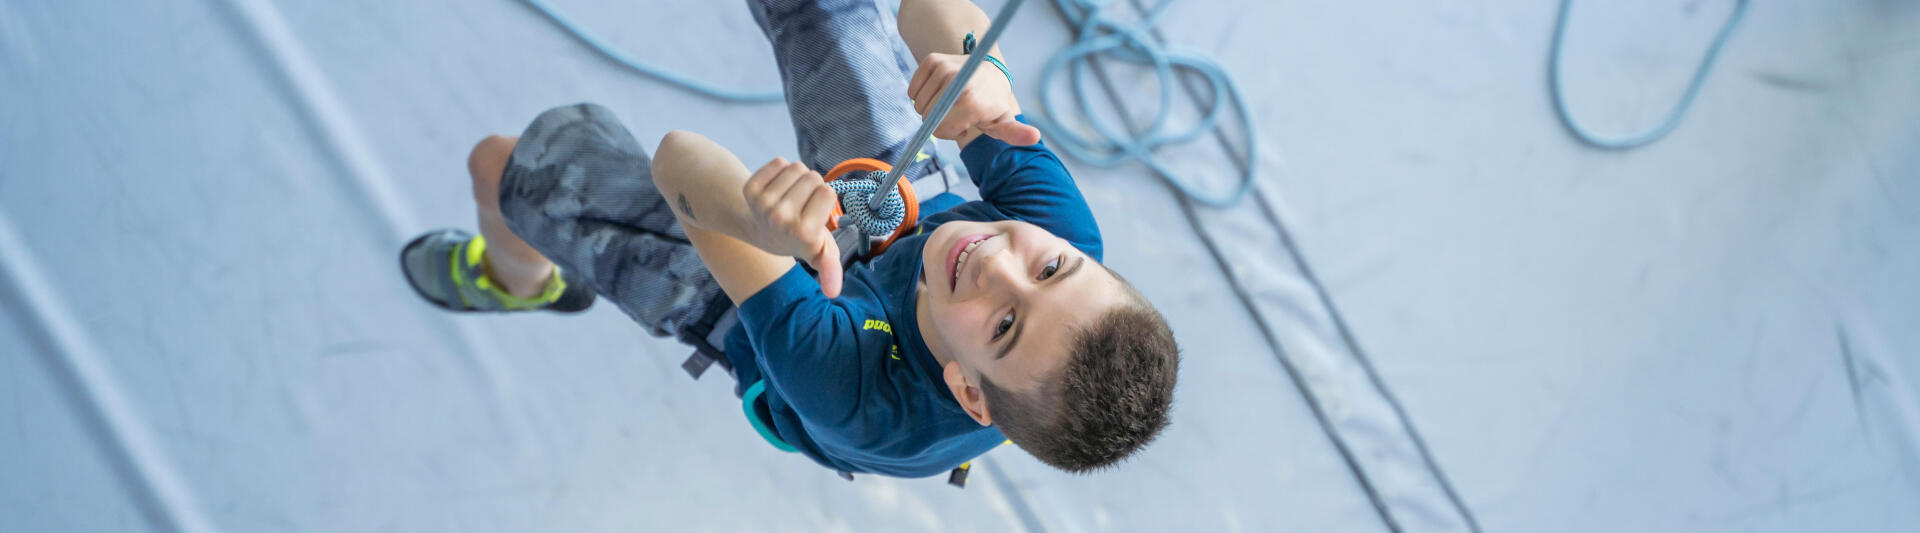 little boy climbing with thumbs up